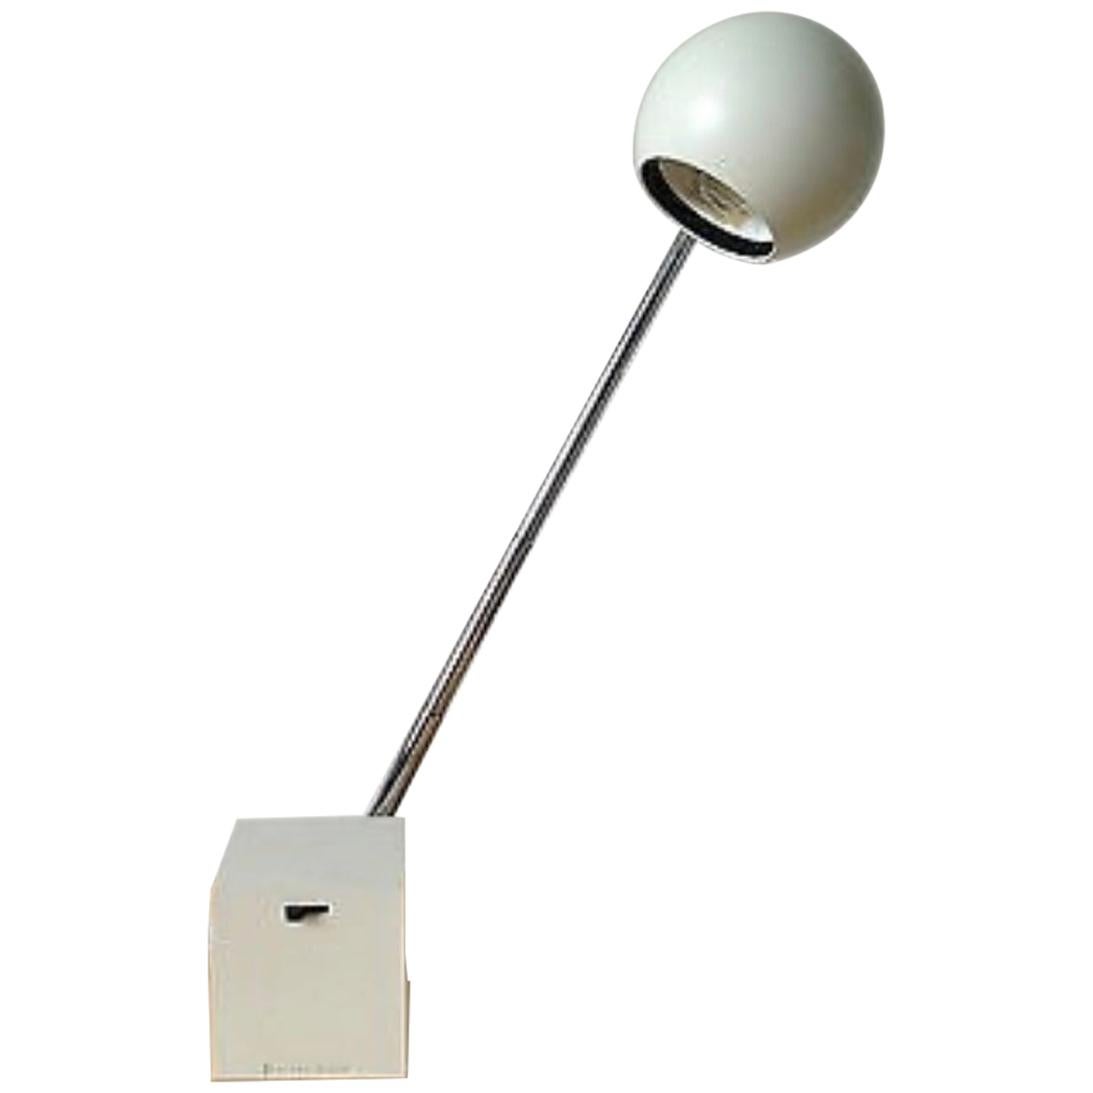 All white Lytegem lamp with spherical metal shade, cube base and chrome arm. Designed by Michael Lax for Lightolier. USA, circa 1990.

Named by the late Industrial designer Jay Doblin as one of the 20th century's 100 great product designs. The